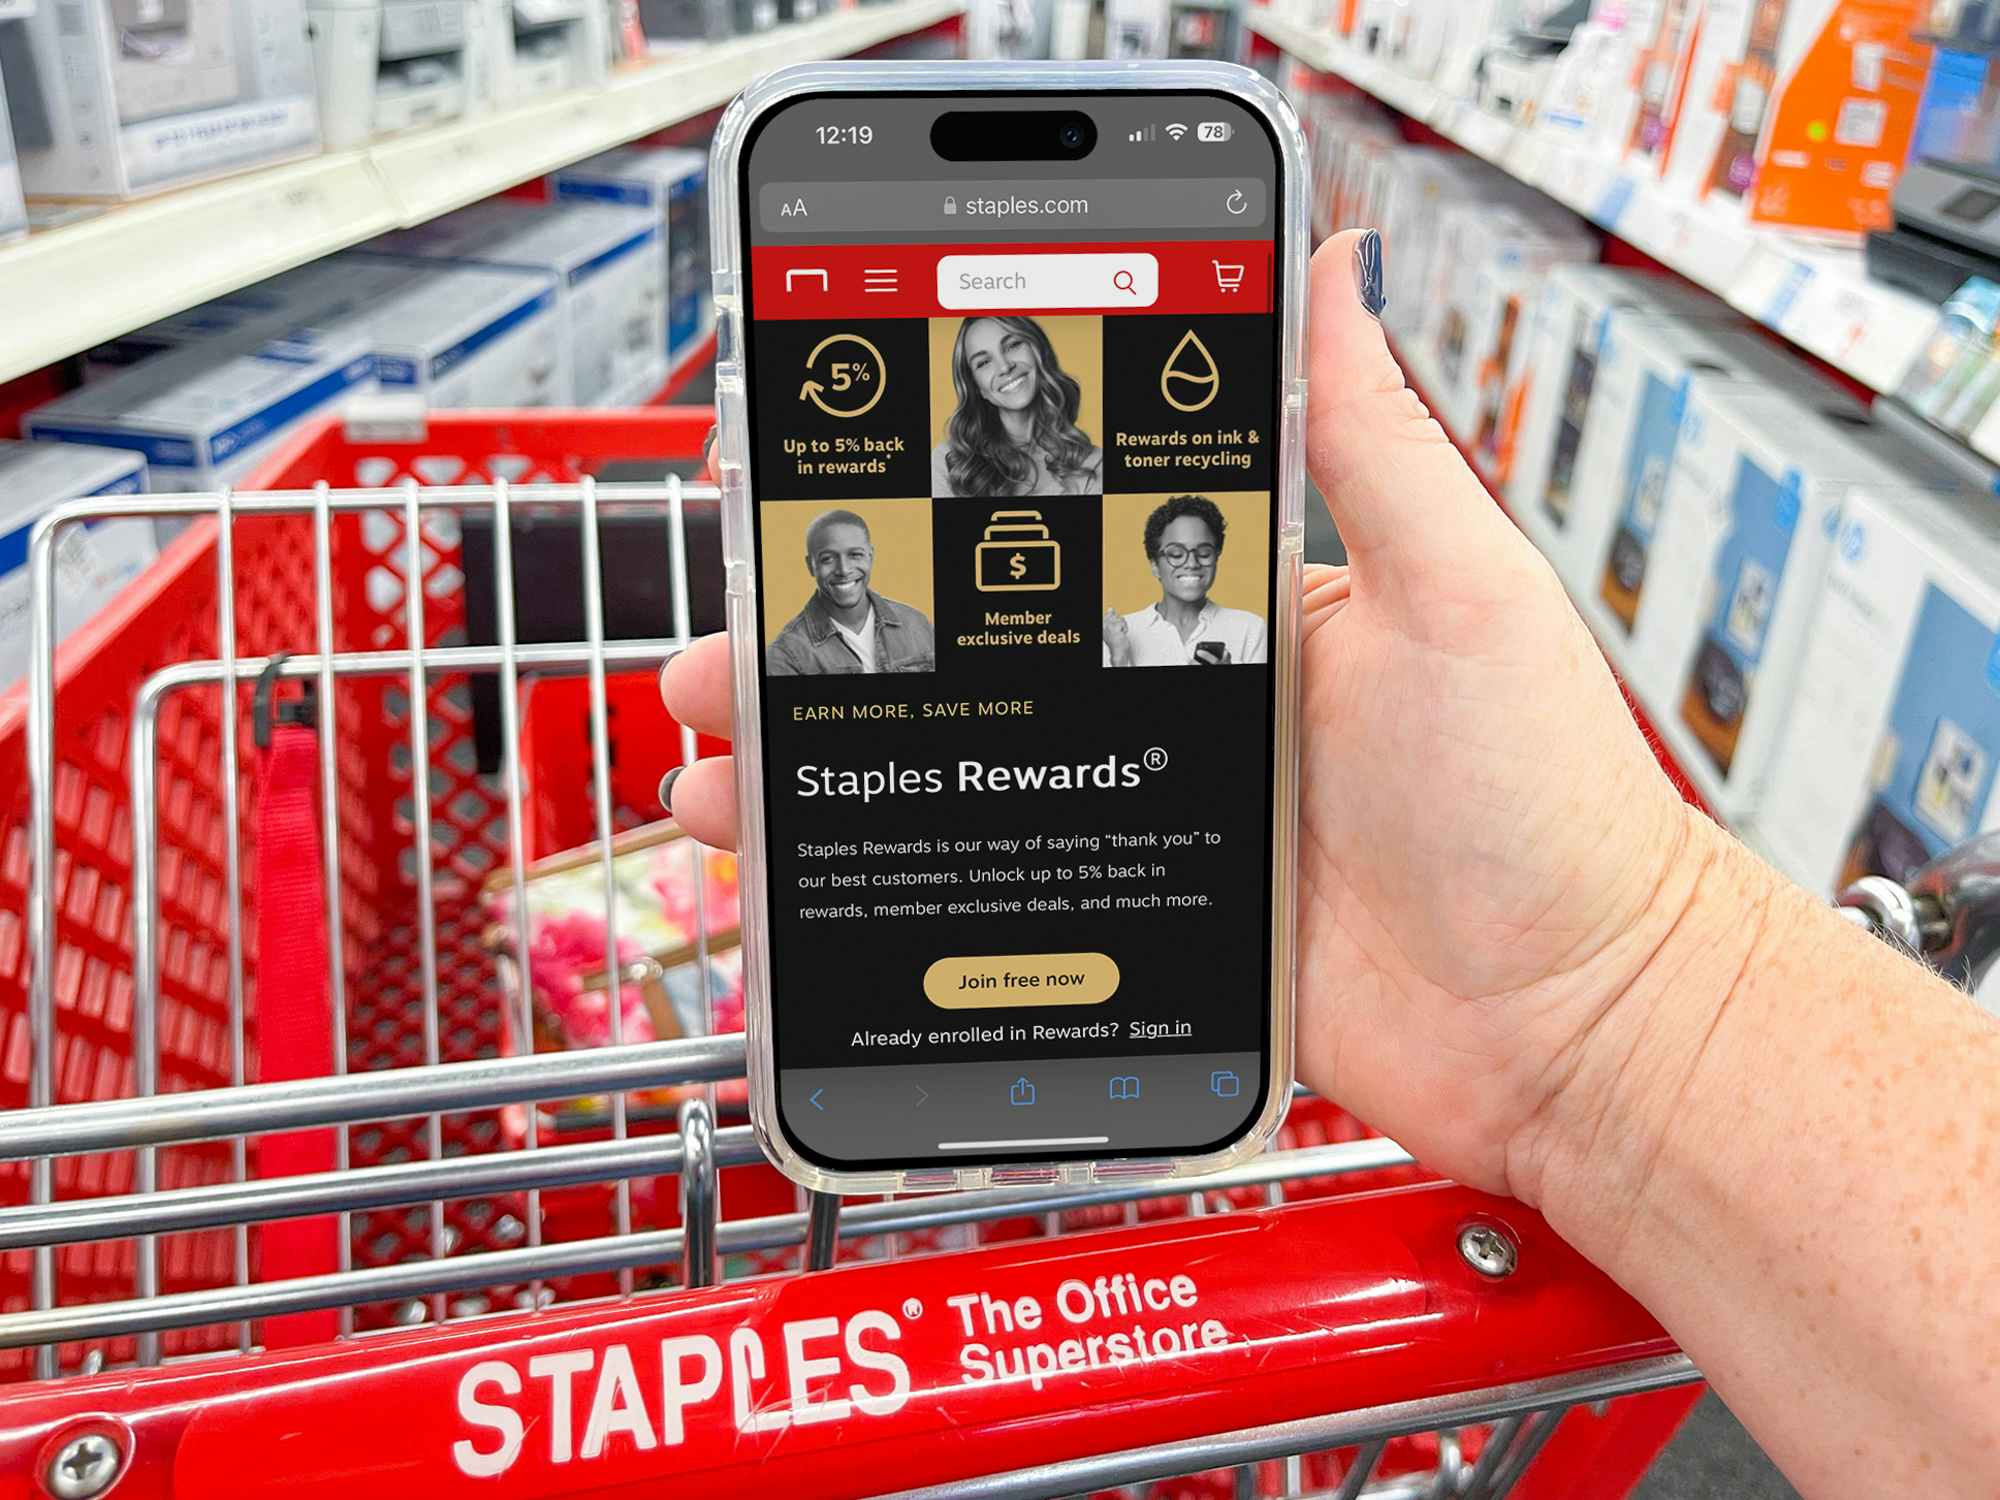 A person's hand resting on the handle of a Staples shopping cart, holding a cell phone displaying the Staples Rewards page on their website.